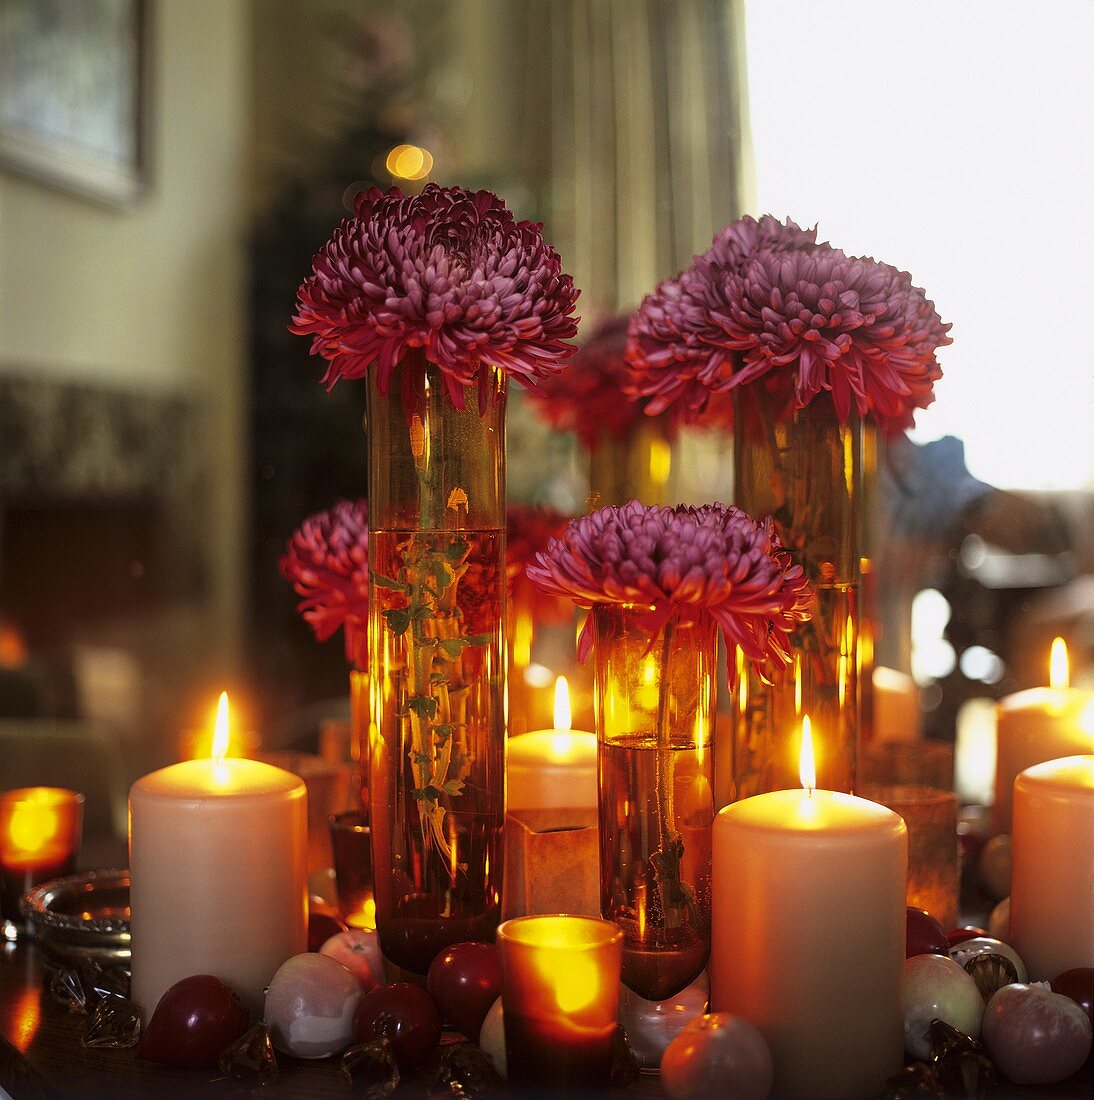 Dahlias on a table with burning candles